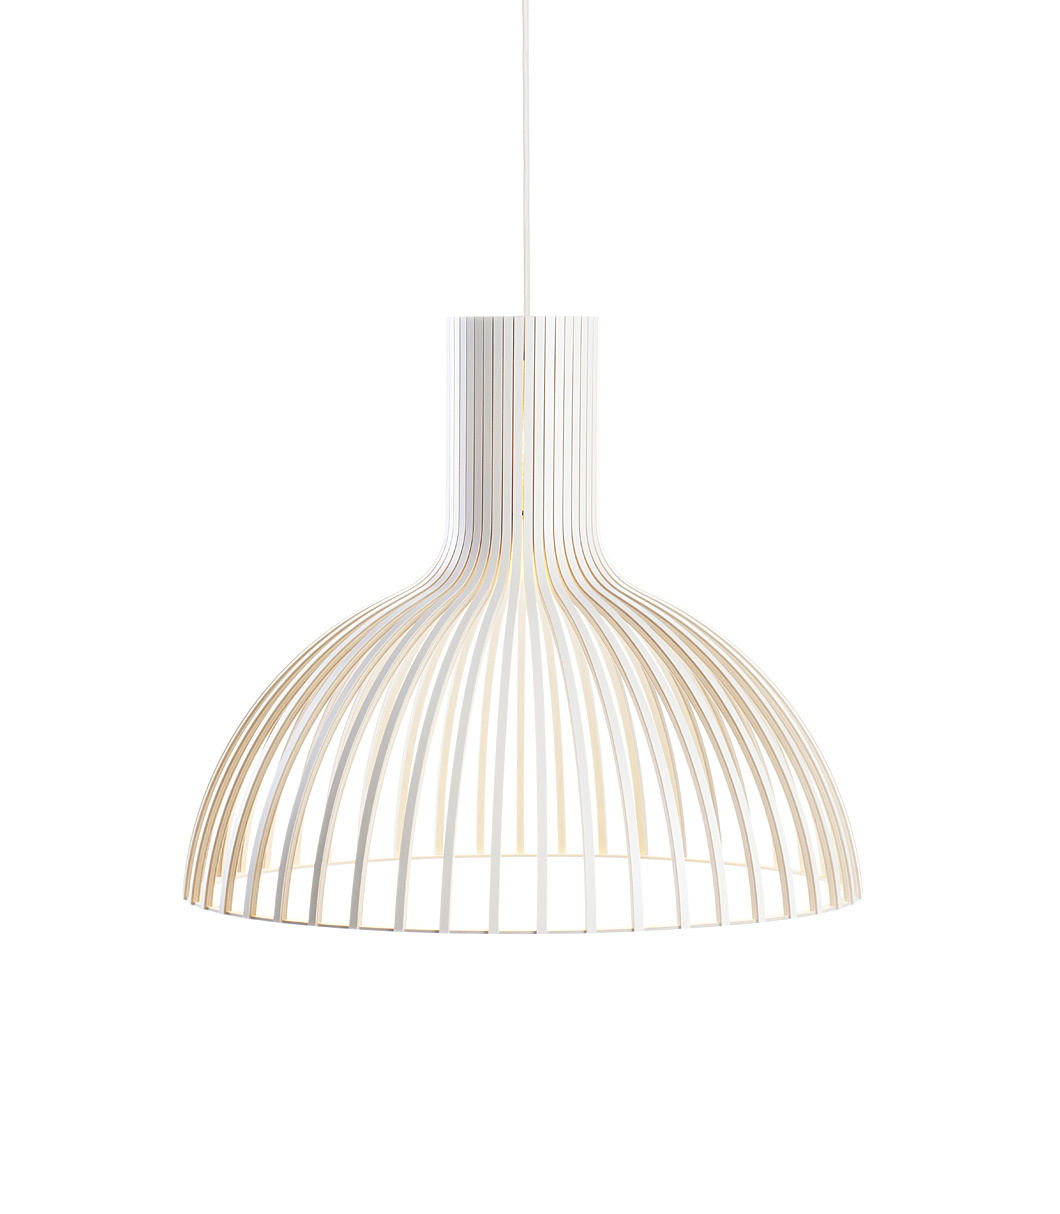 Victo 4250 pendant lamp is available in white laminated